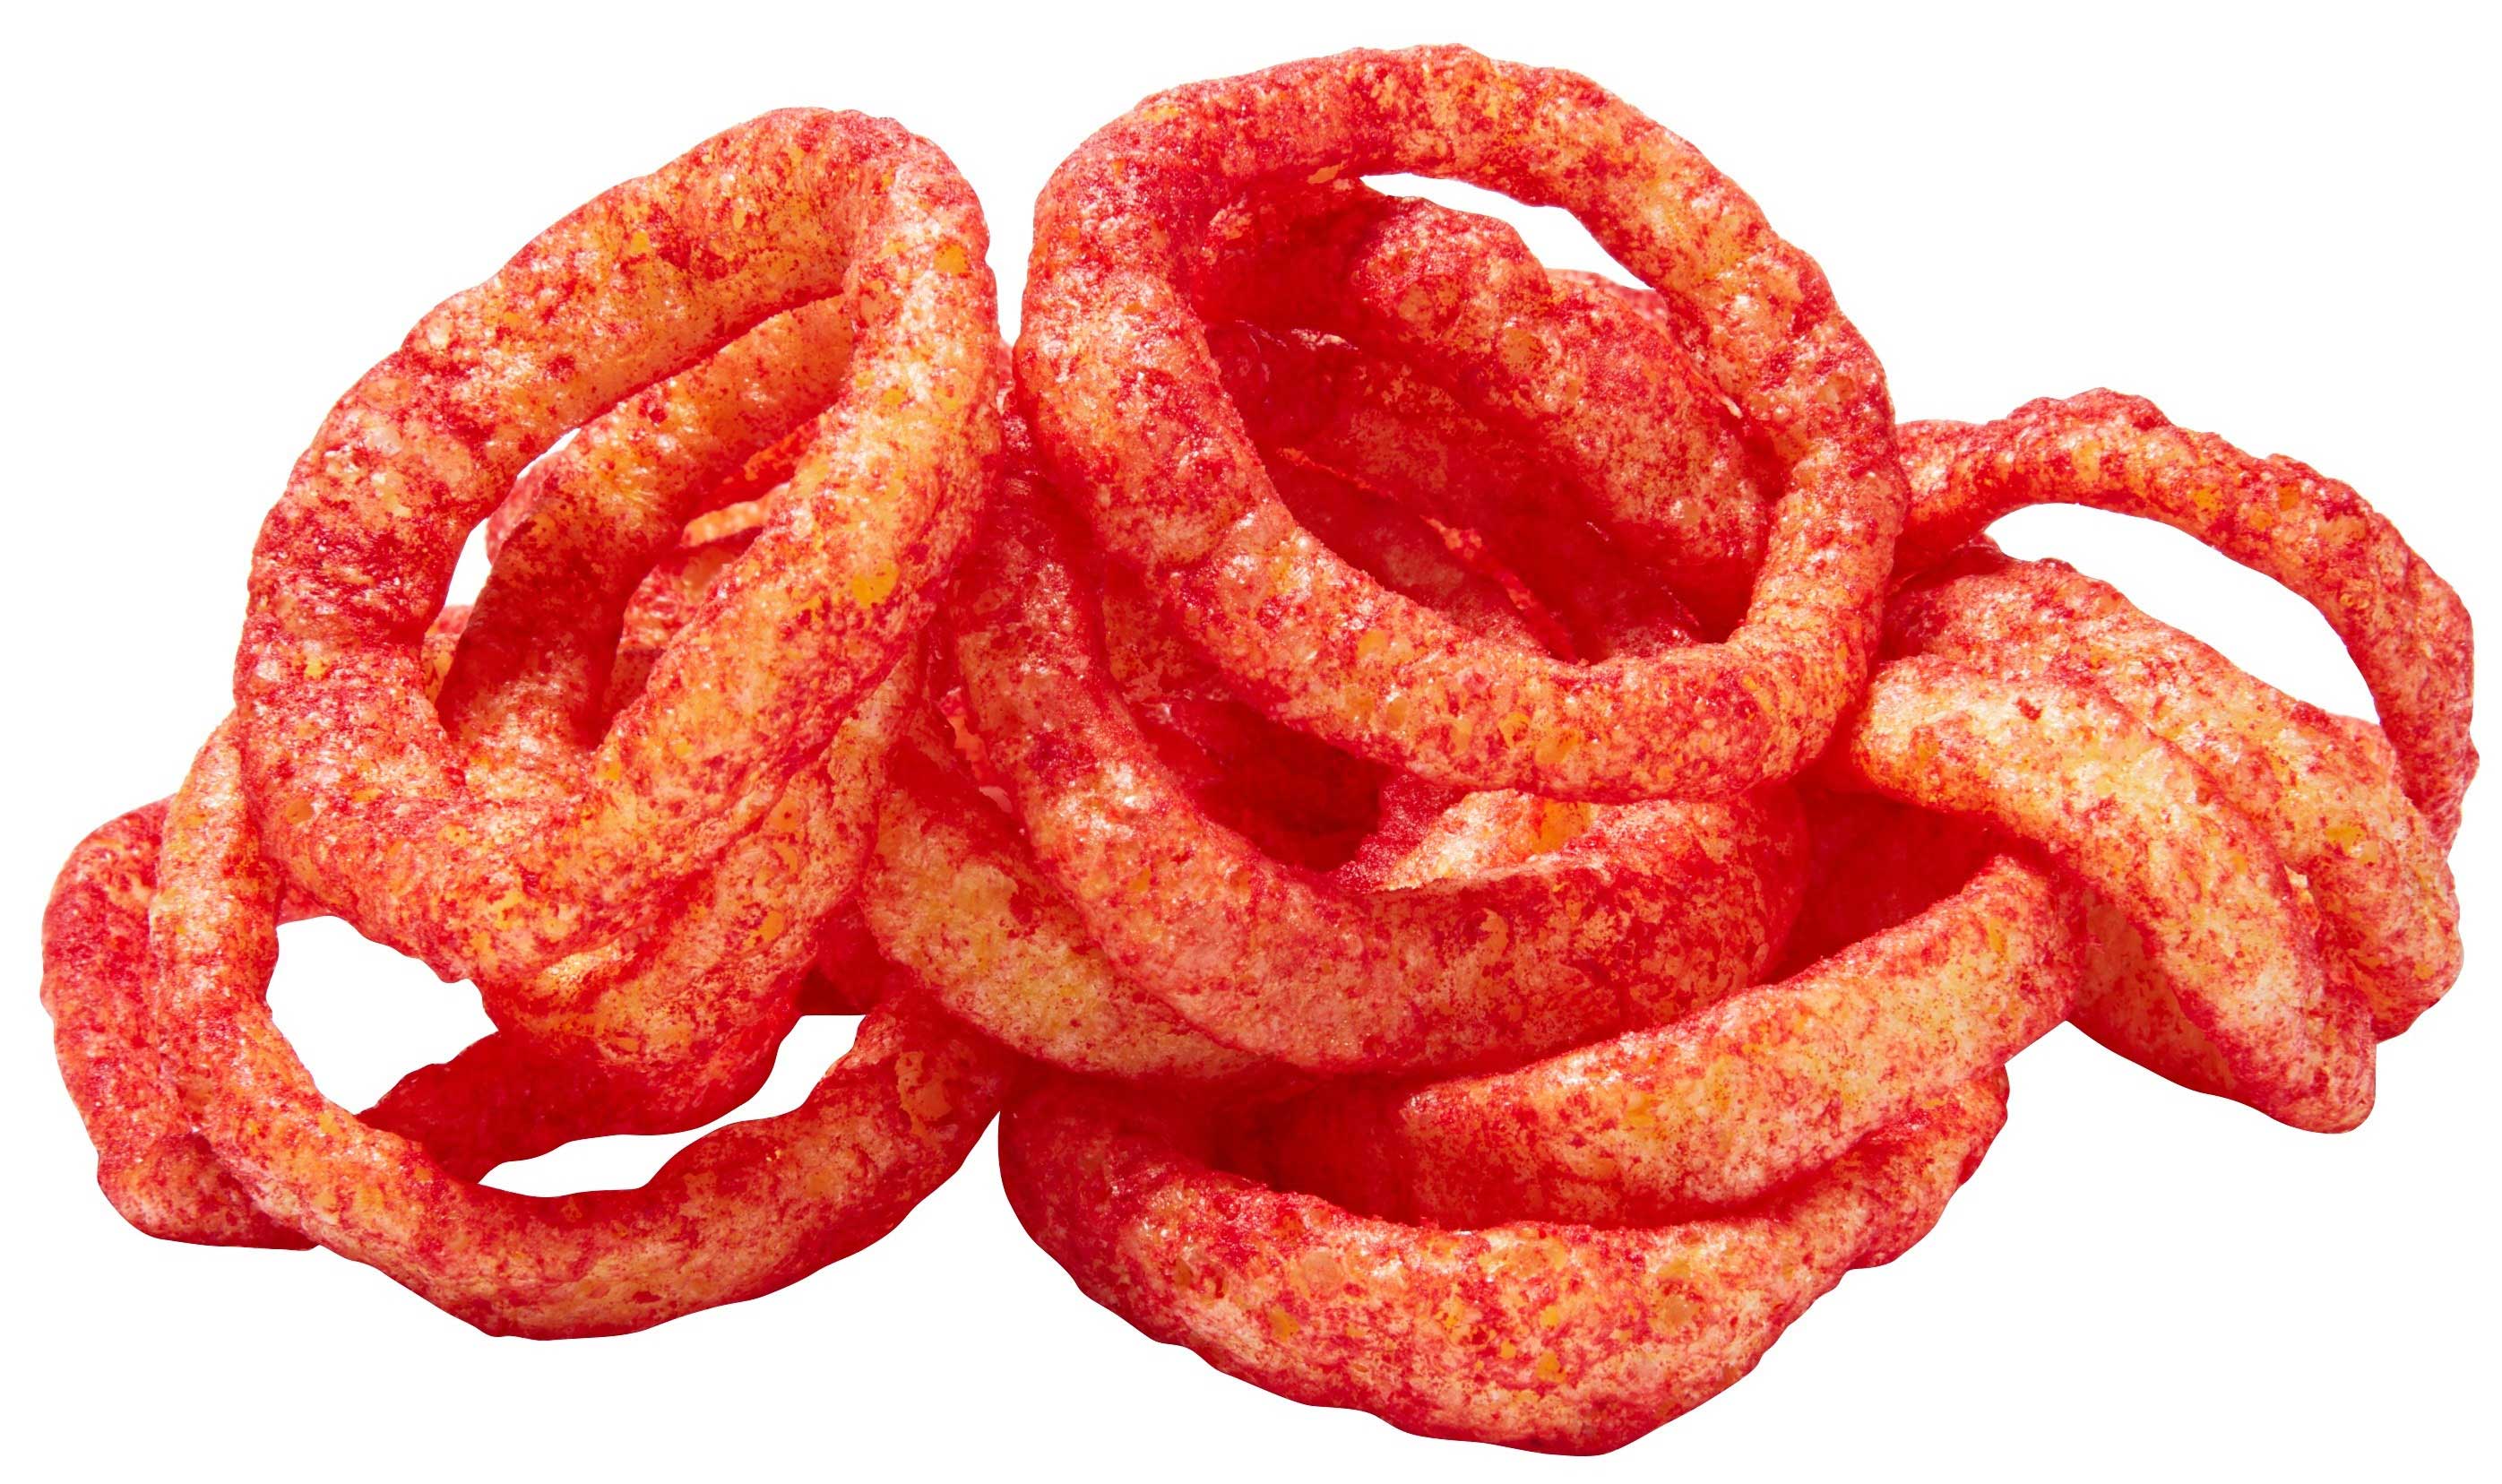 Tomato Rings In Pune, Maharashtra At Best Price | Tomato Rings  Manufacturers, Suppliers In Poona